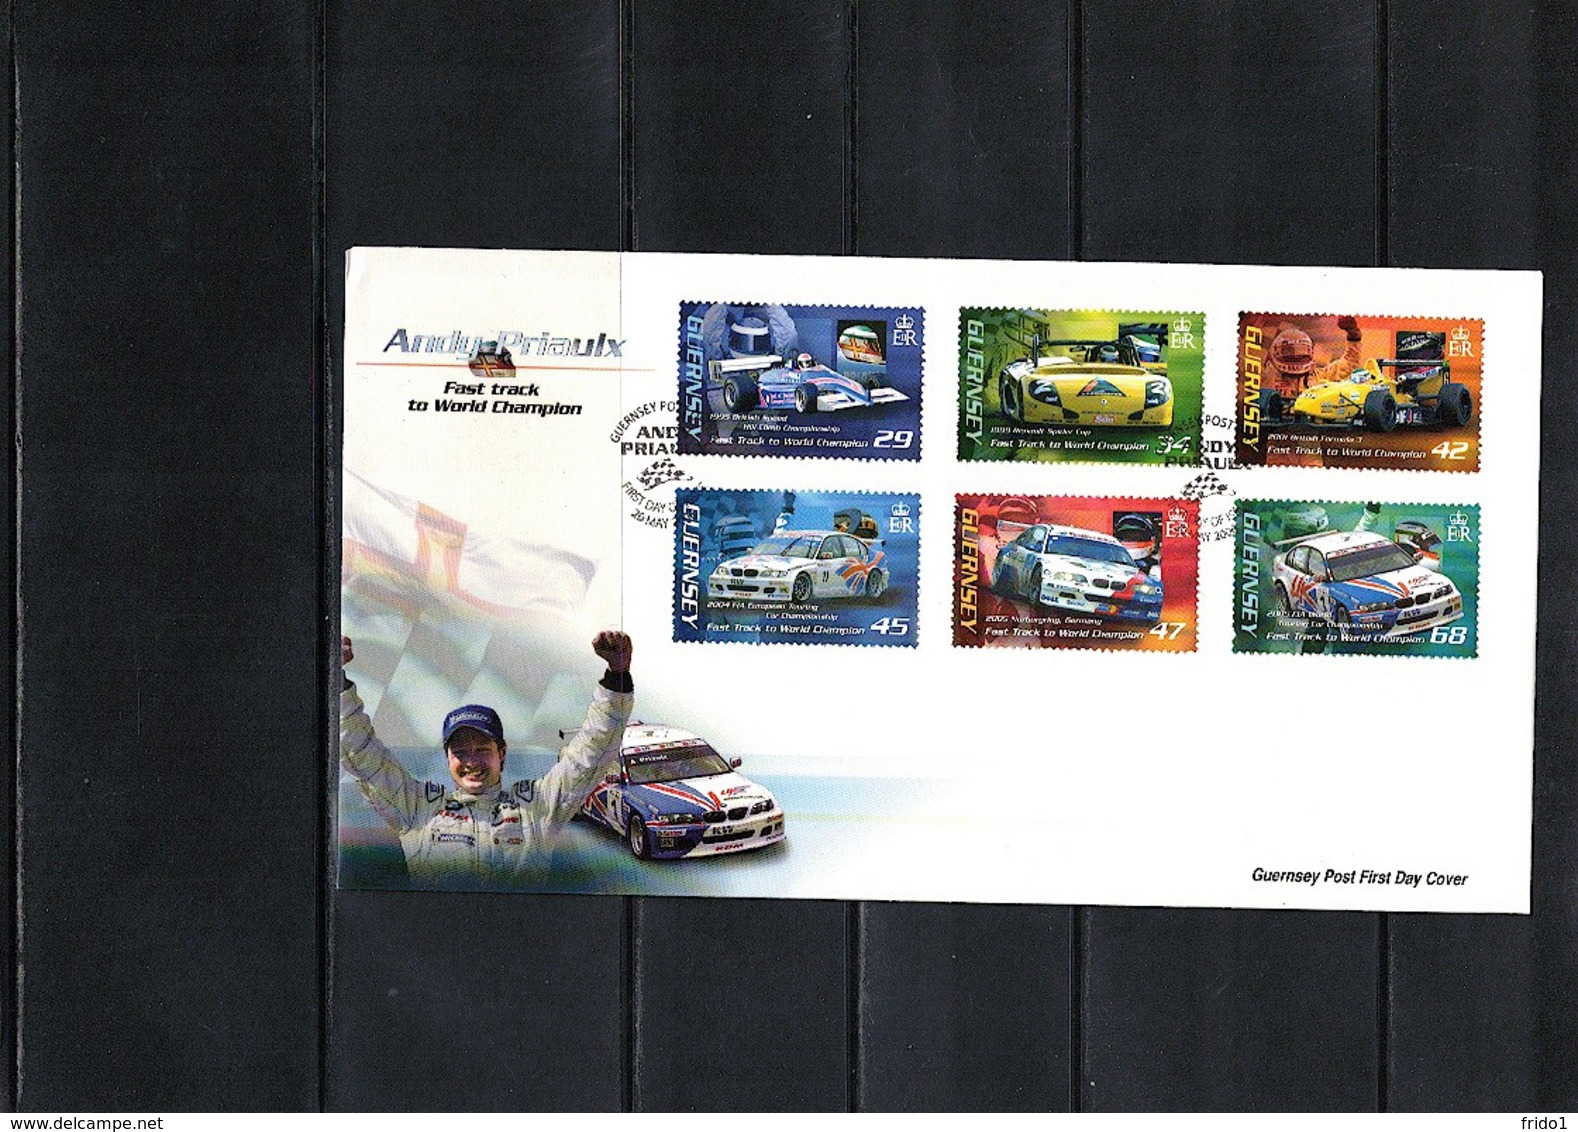 Guernsey 2006 Andy Priaulx World Racing Champion FDC - Automobile